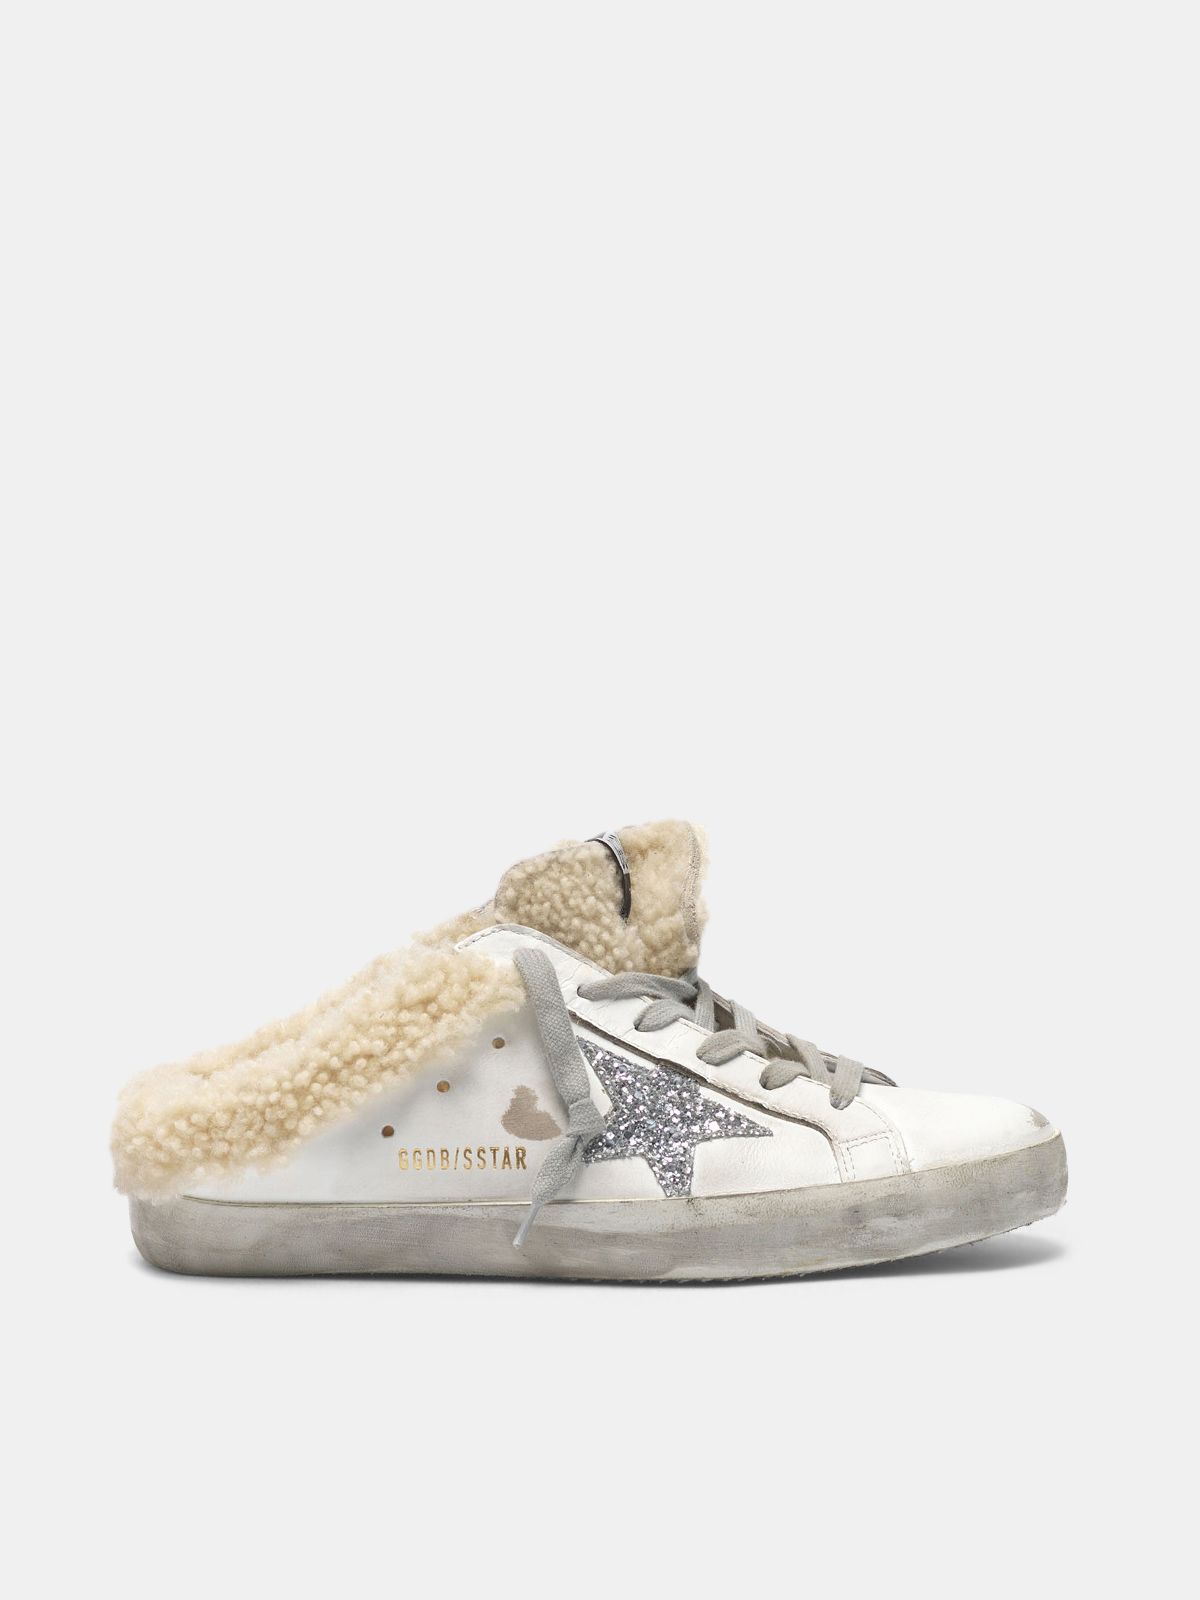 Super-Star sneakers in sabot style with 